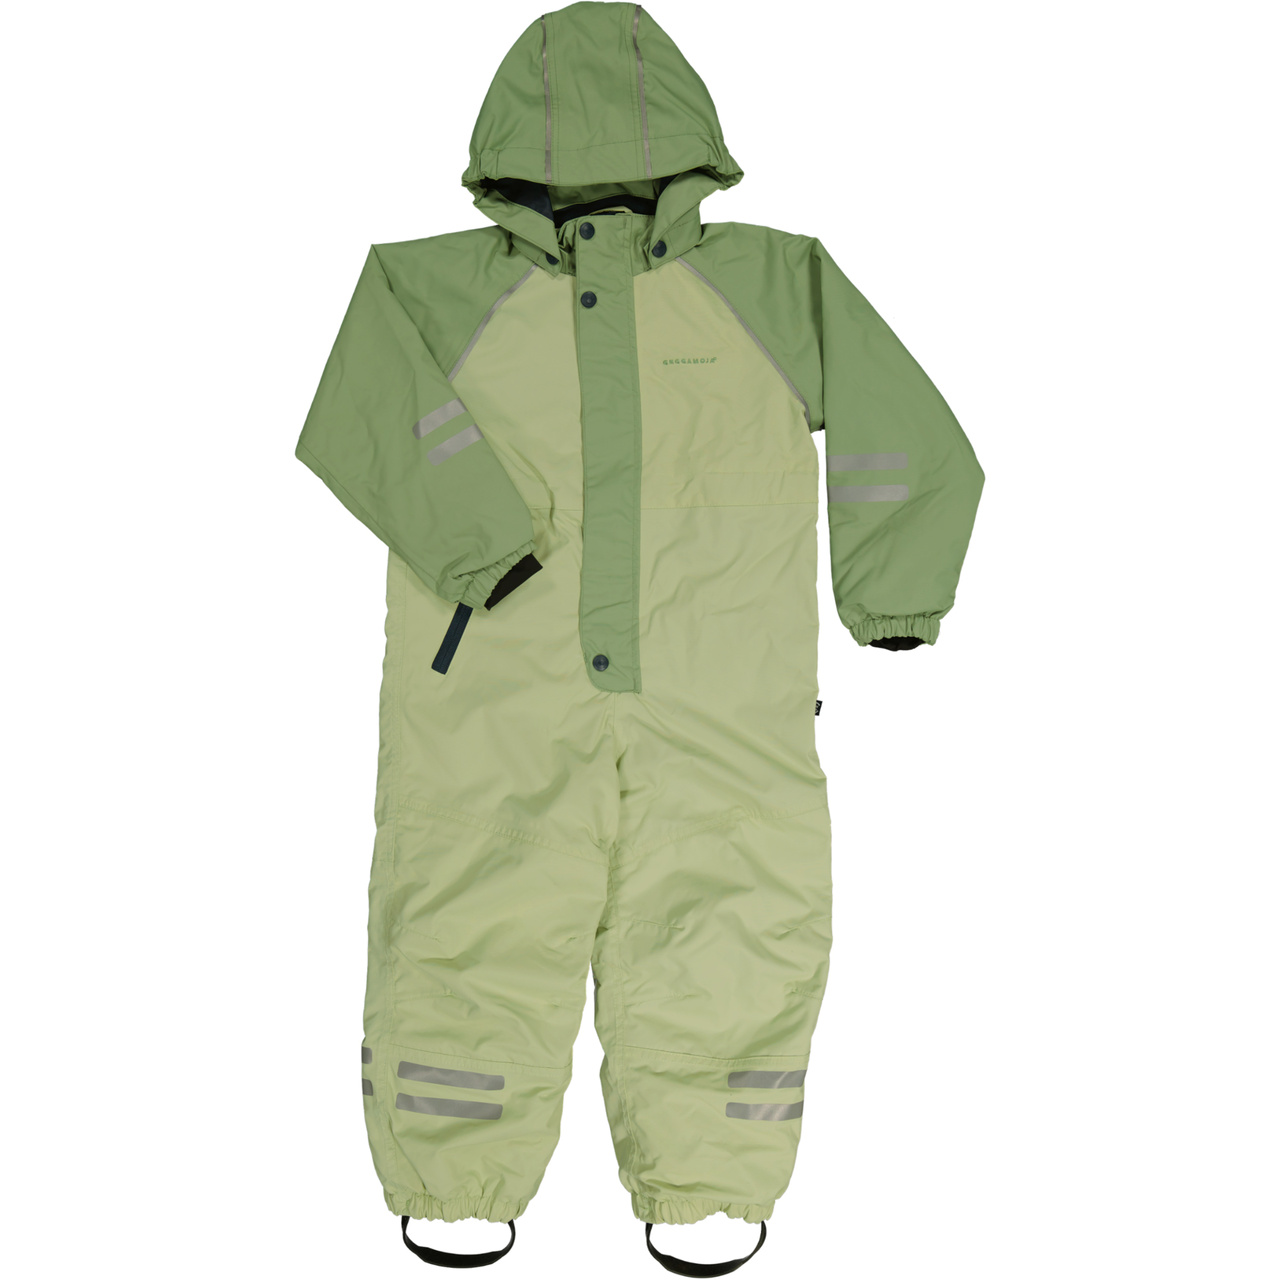 Shell overall Green 122/128